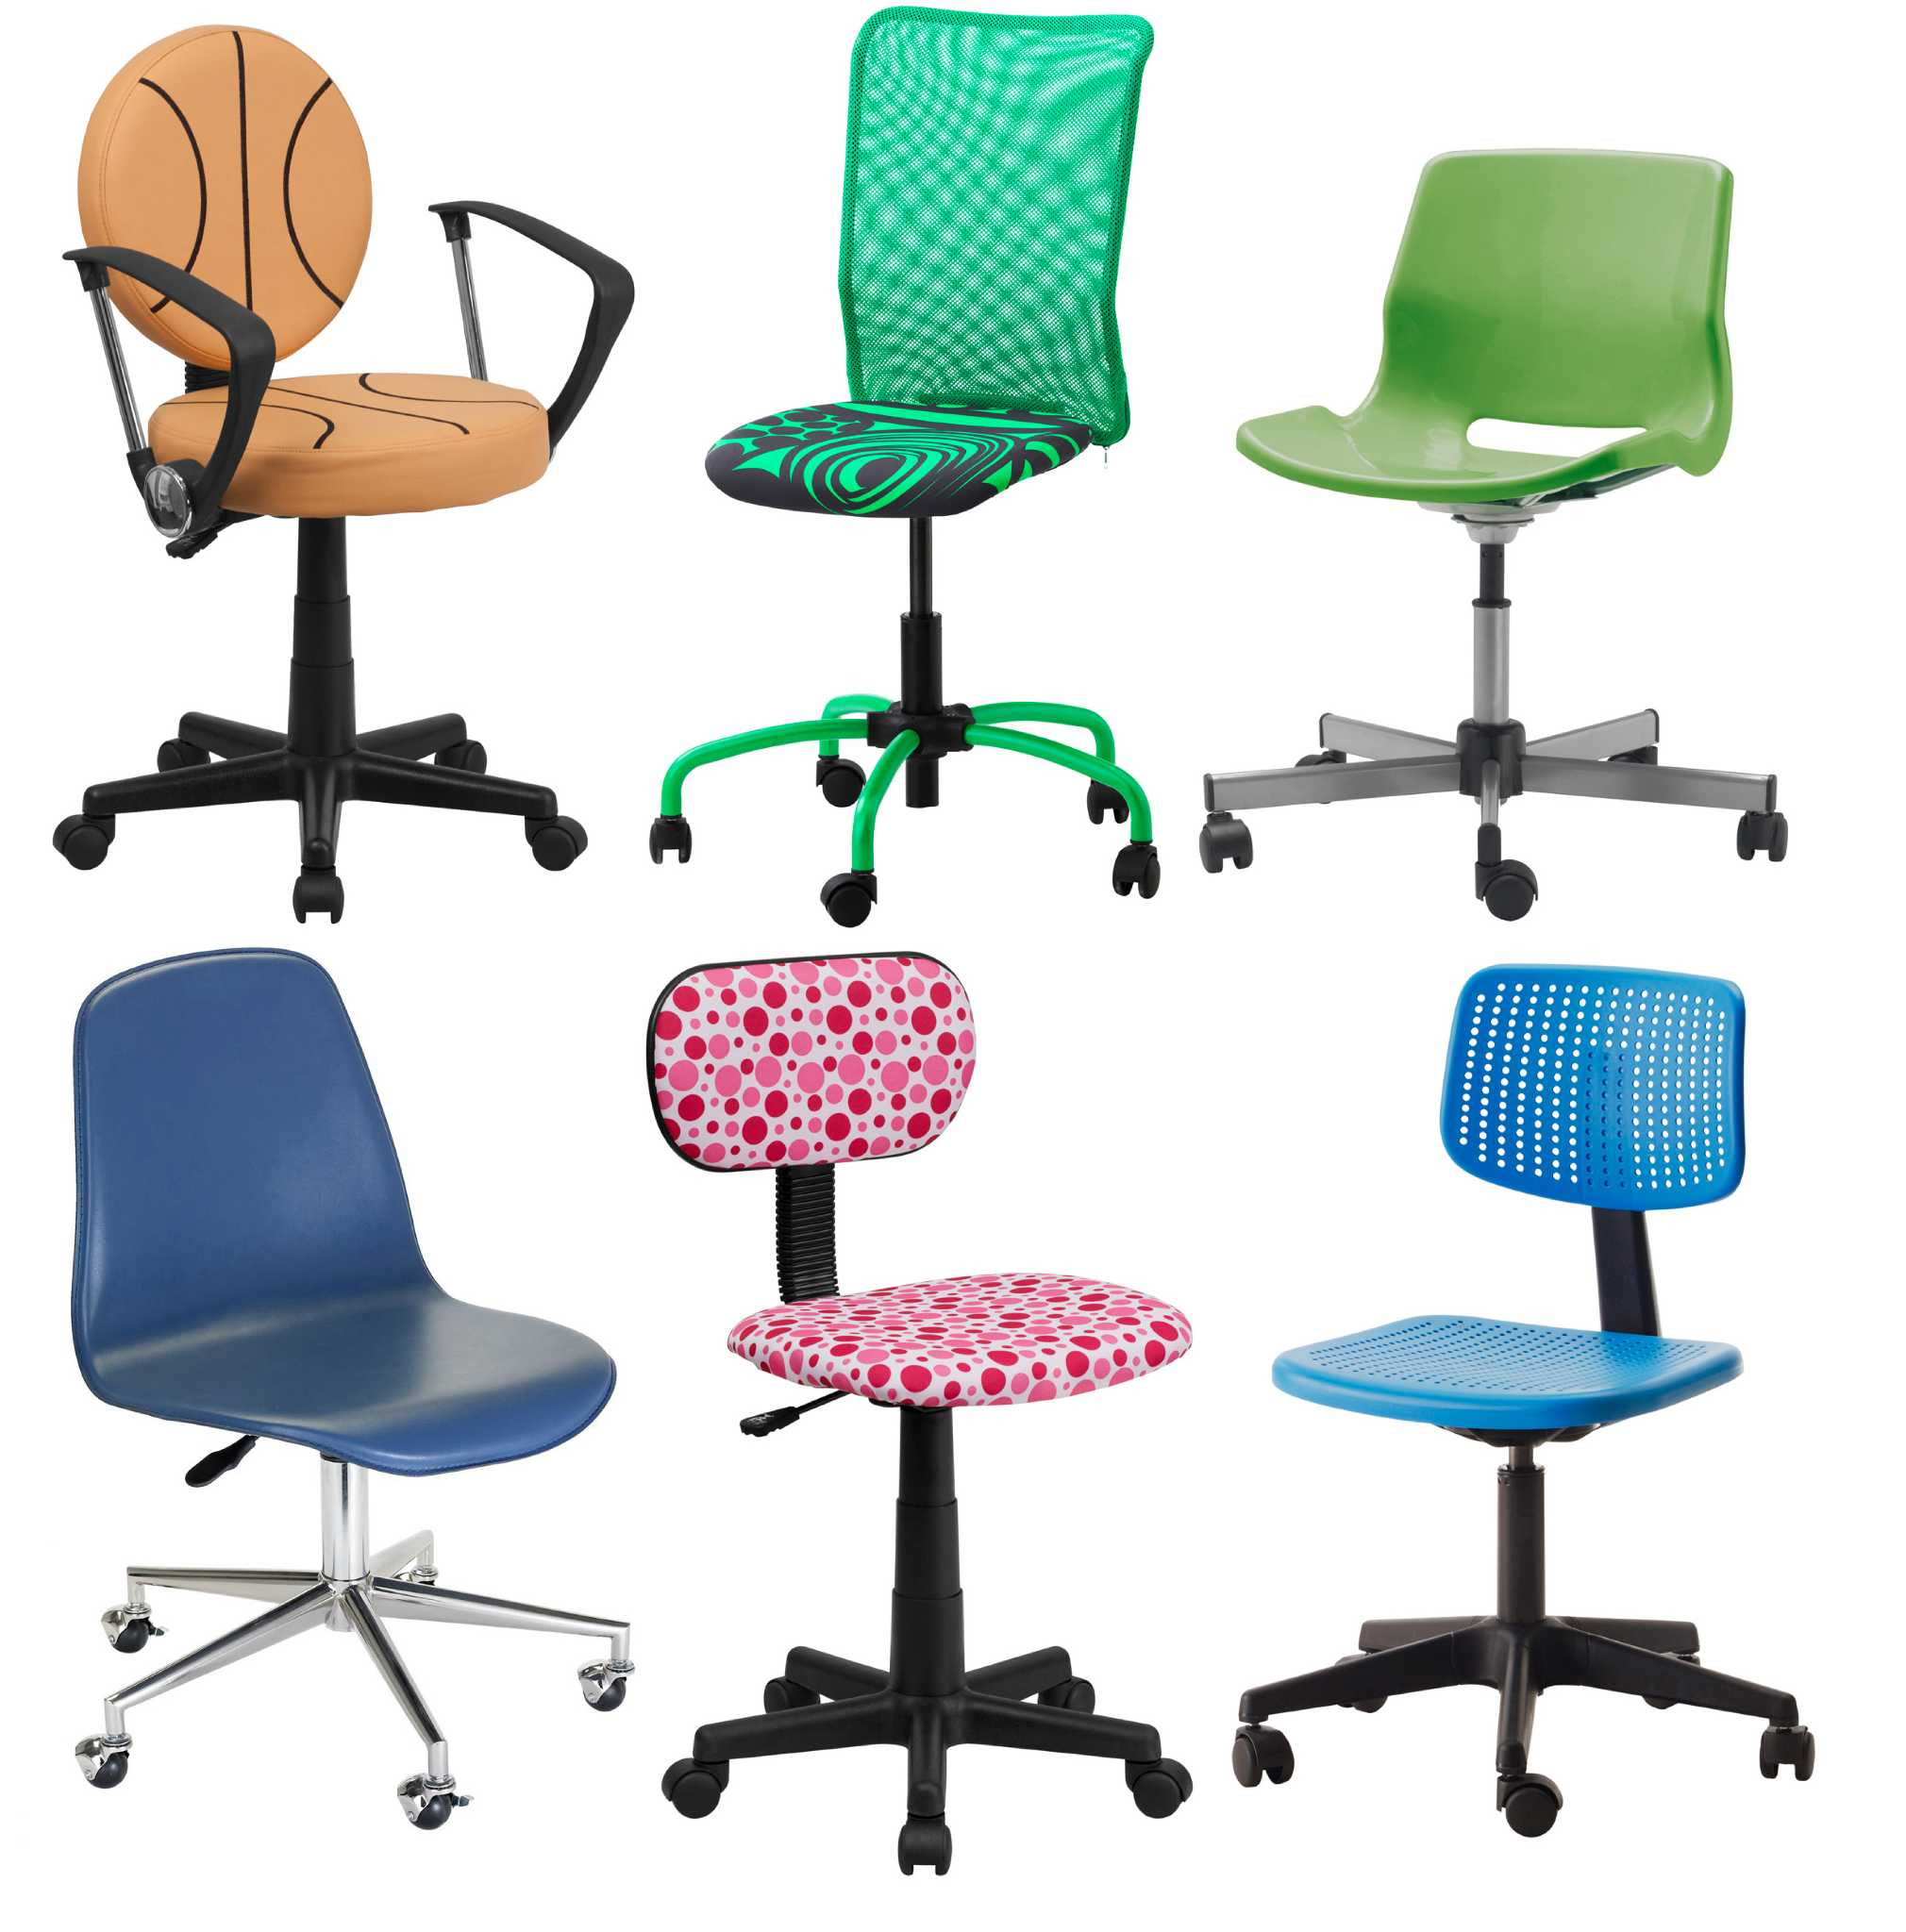 Chair For Kids
 Smaller scale desk chairs best for children Houston